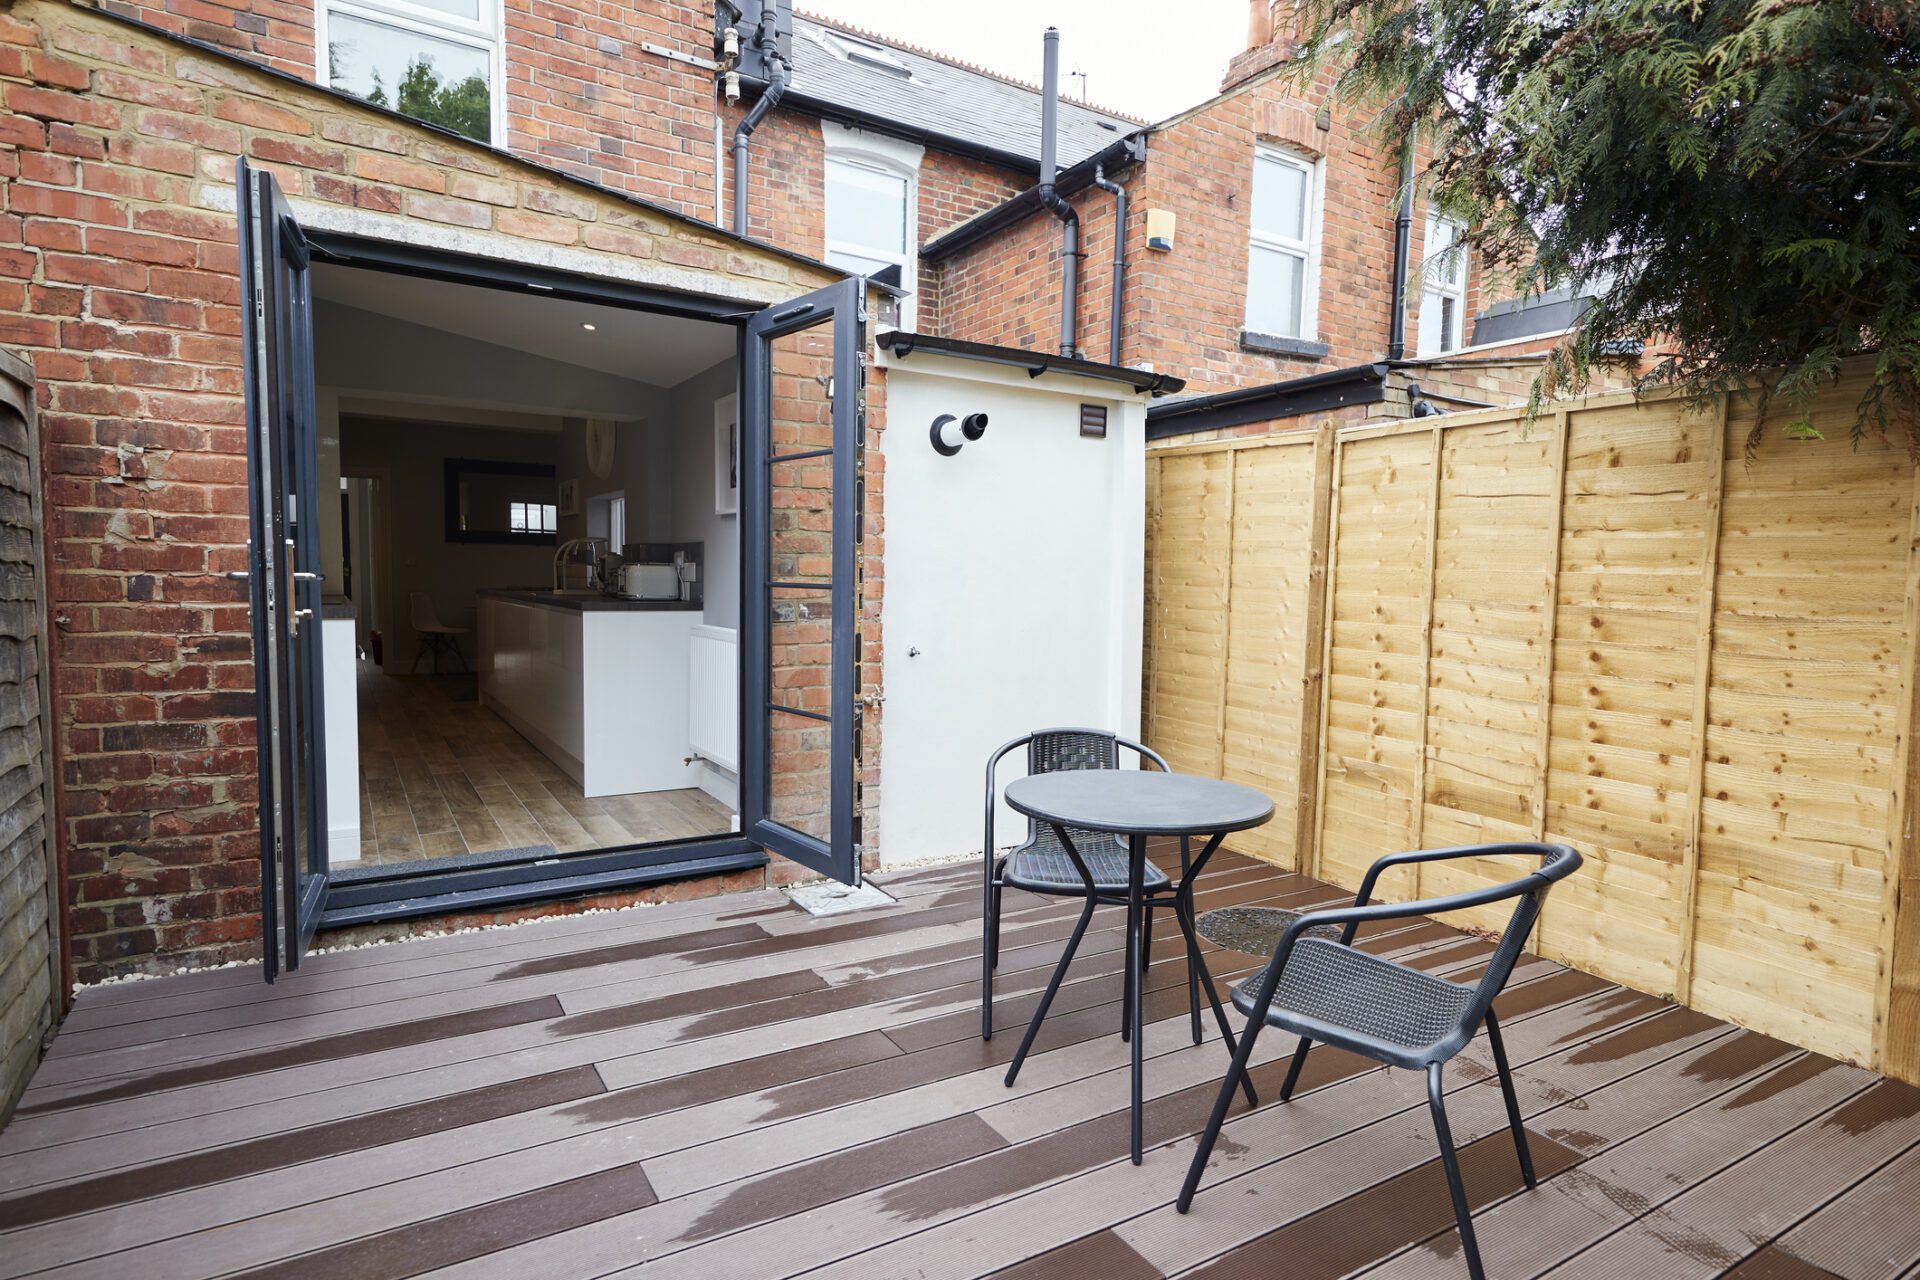 Patio area at the back of a newly refurbished terraced house